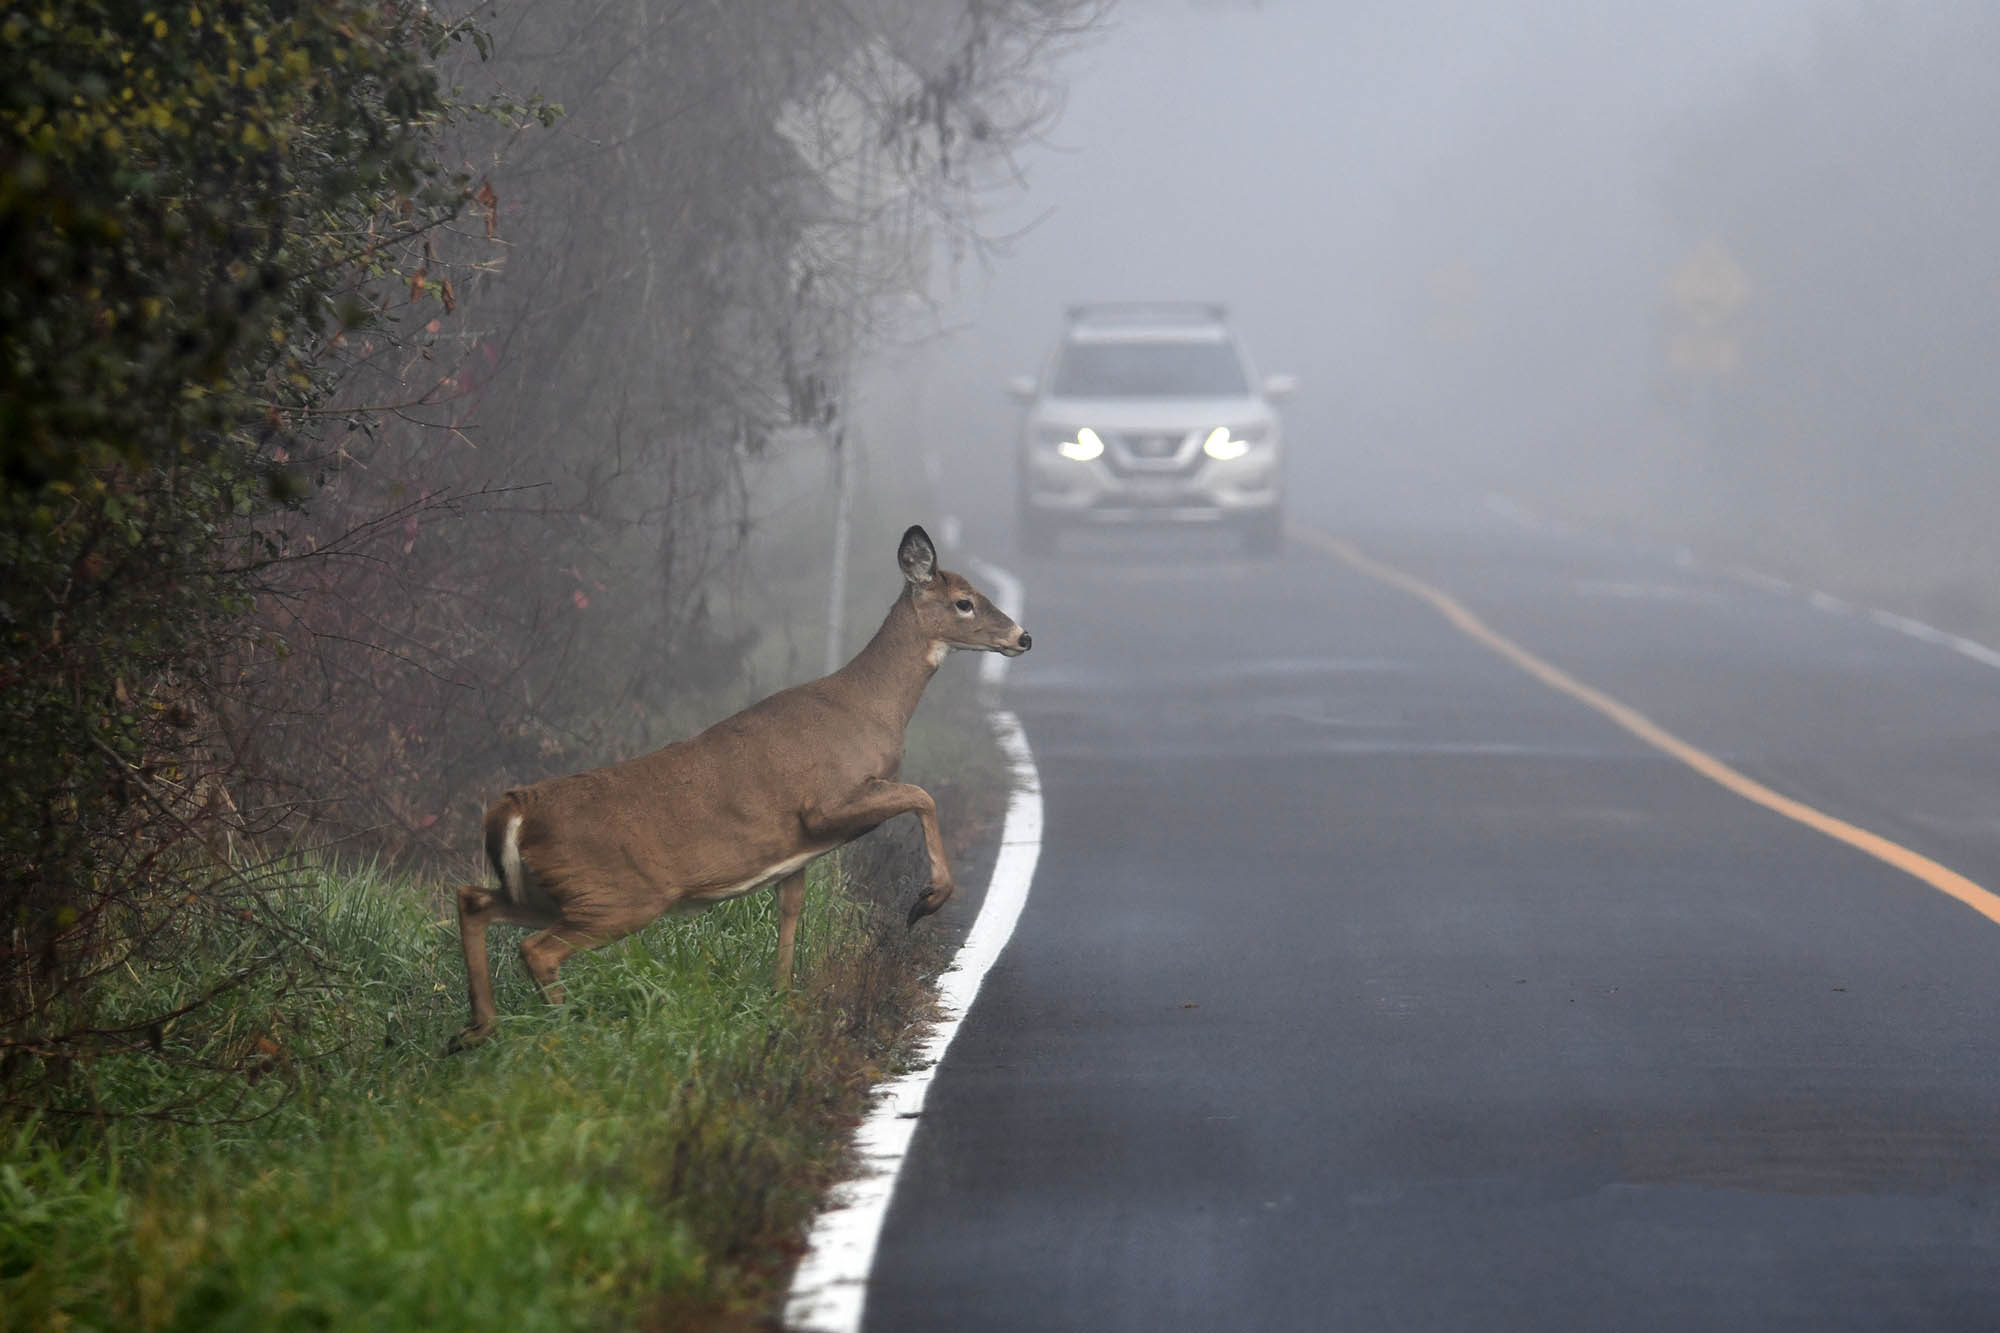 A deer by the side of a paved road with a car in the background